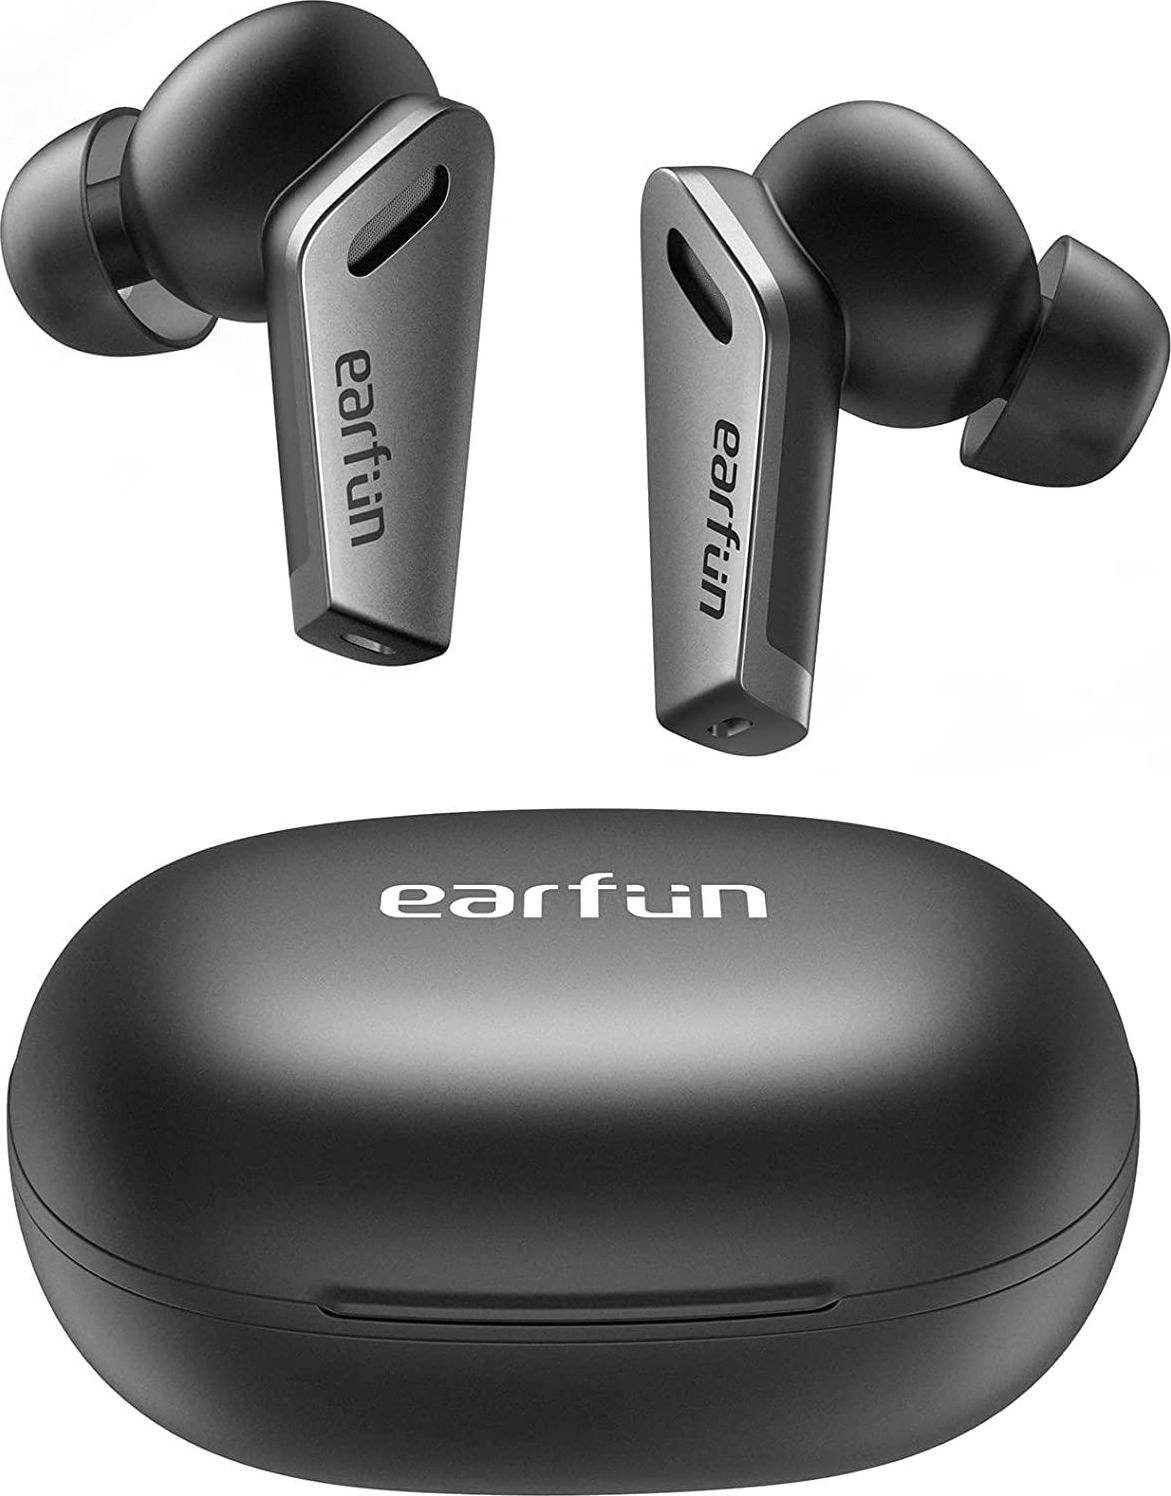 EarFun, EarFun Air Pro Wireless Earbuds Active Noise Cancelling, Bluetooth 5 Earbuds with 6 Mics ENC, Stereo Deep Bass, 32H Play Time with USB-C, in-Ear Detection Headphones IPX5 Waterproof